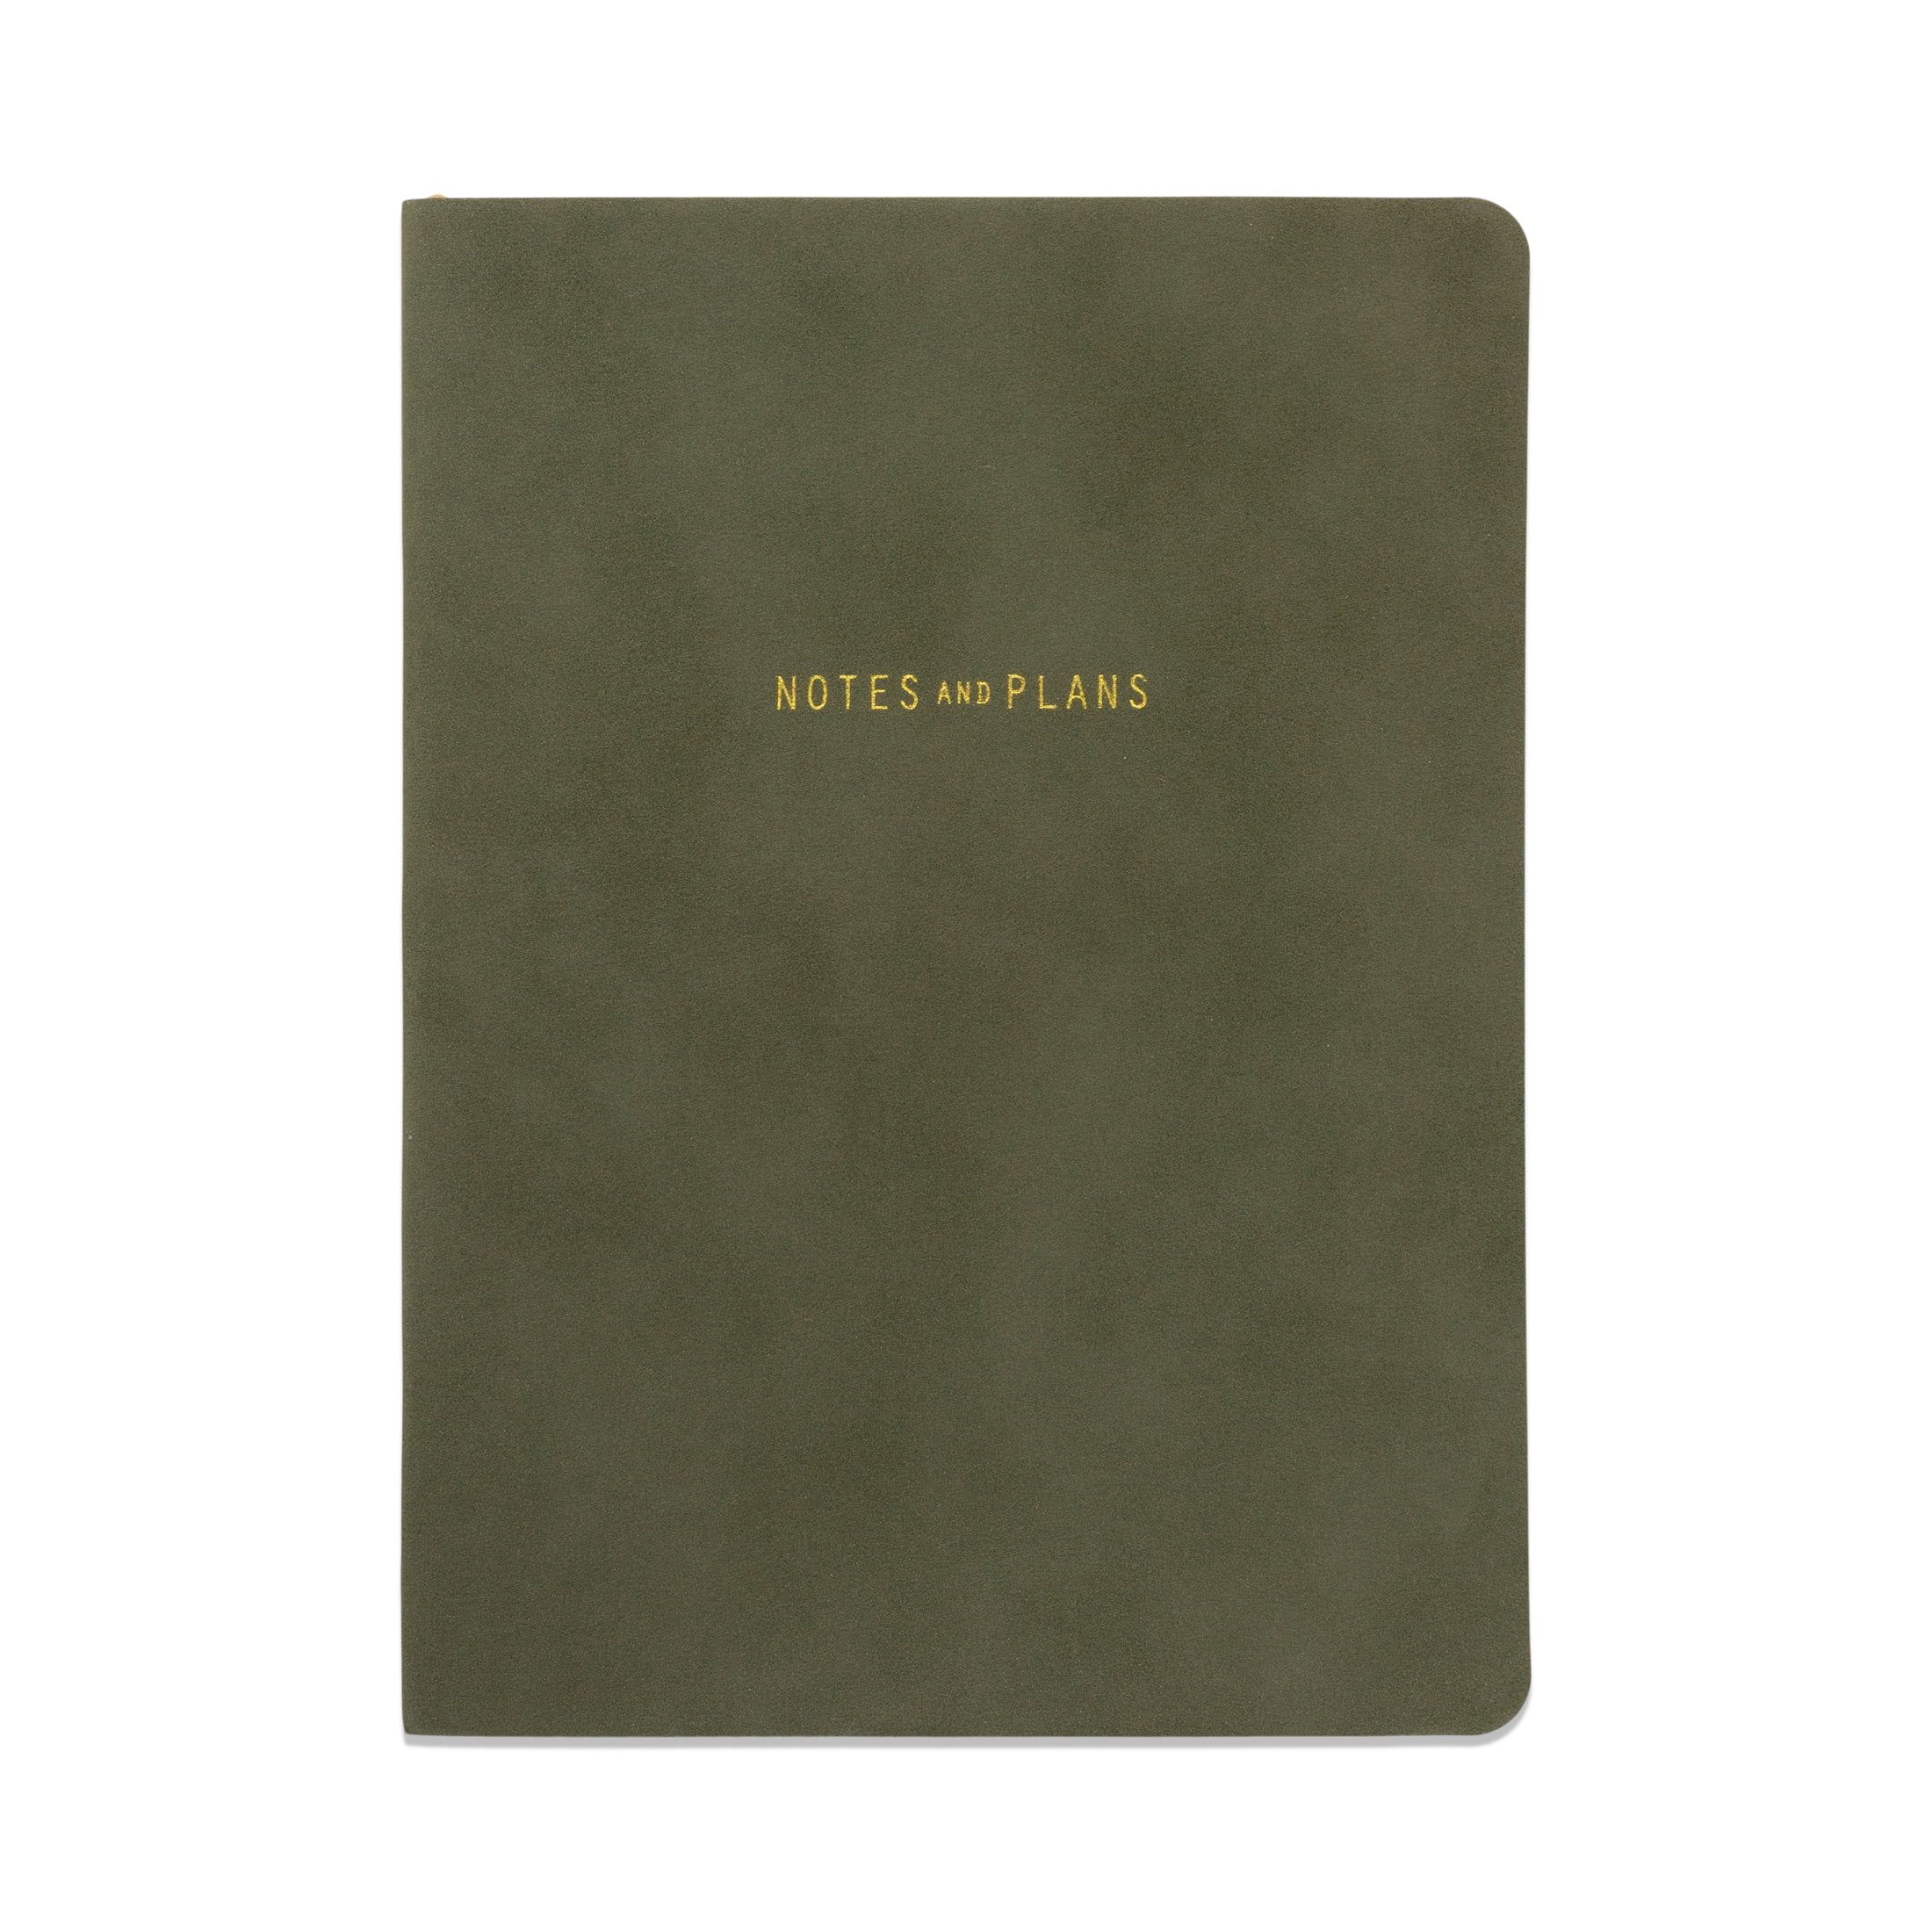 Pen + Gear Flex Suede Journal, Olive, 5.75" x 8" x 0.5", 192 Lined Pages, 96 Sheets | Walmart (US)